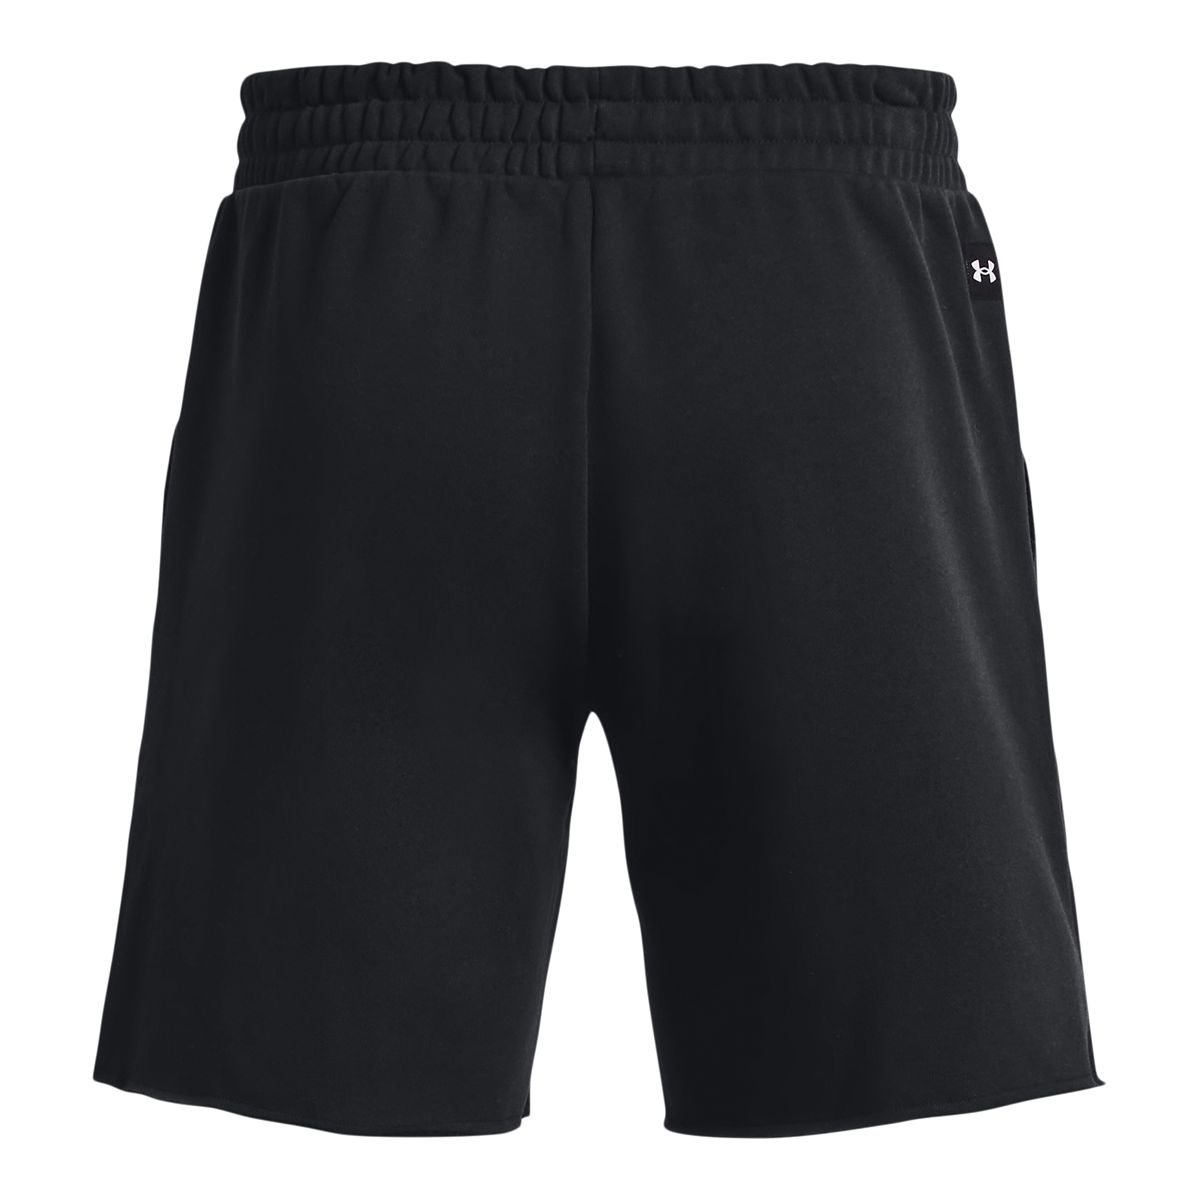 https://media-www.sportchek.ca/product/div-03-softgoods/dpt-70-athletic-clothing/sdpt-01-mens/333969538/under-armour-men-s-project-rock-legacy-heavyweight-terry-shorts-02391a51-4537-4e60-afe1-dd113f9a9a3c-jpgrendition.jpg?imdensity=1&imwidth=1244&impolicy=mZoom